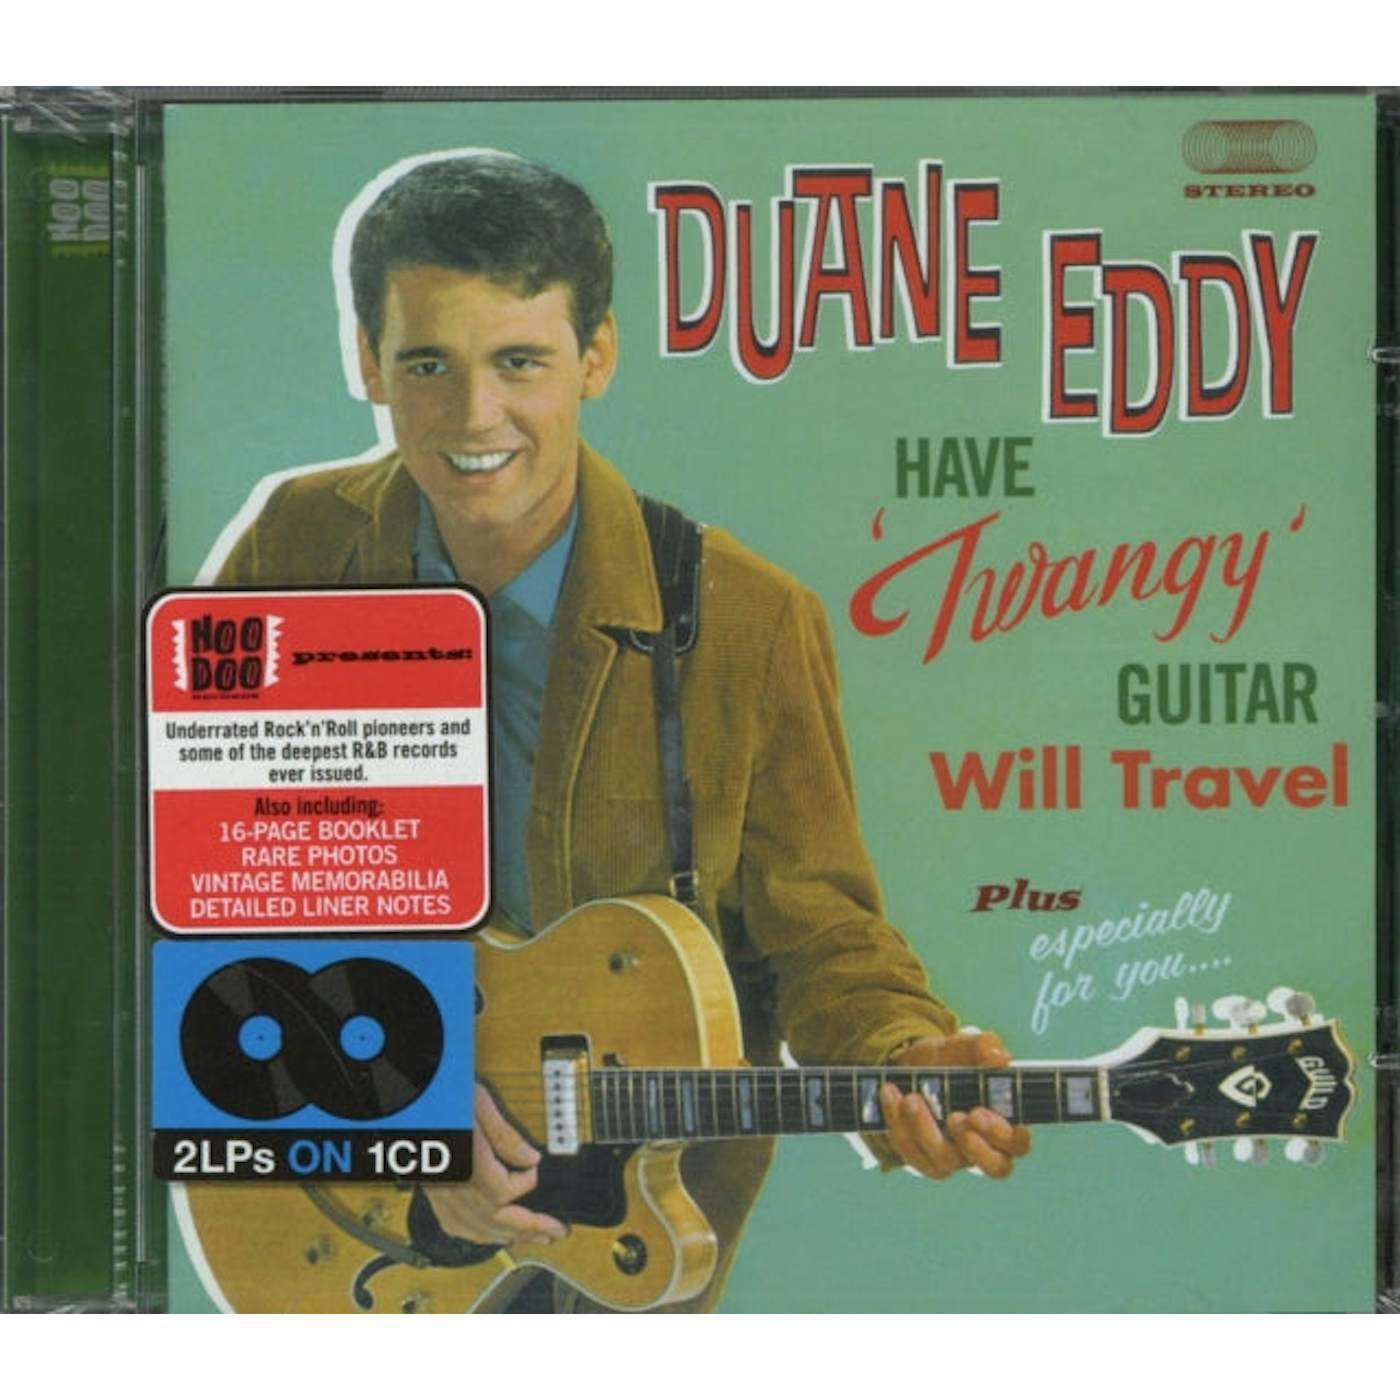 Eddy Duane CD - Have 'Twangy' Guitar - Will Travel / Especially For You